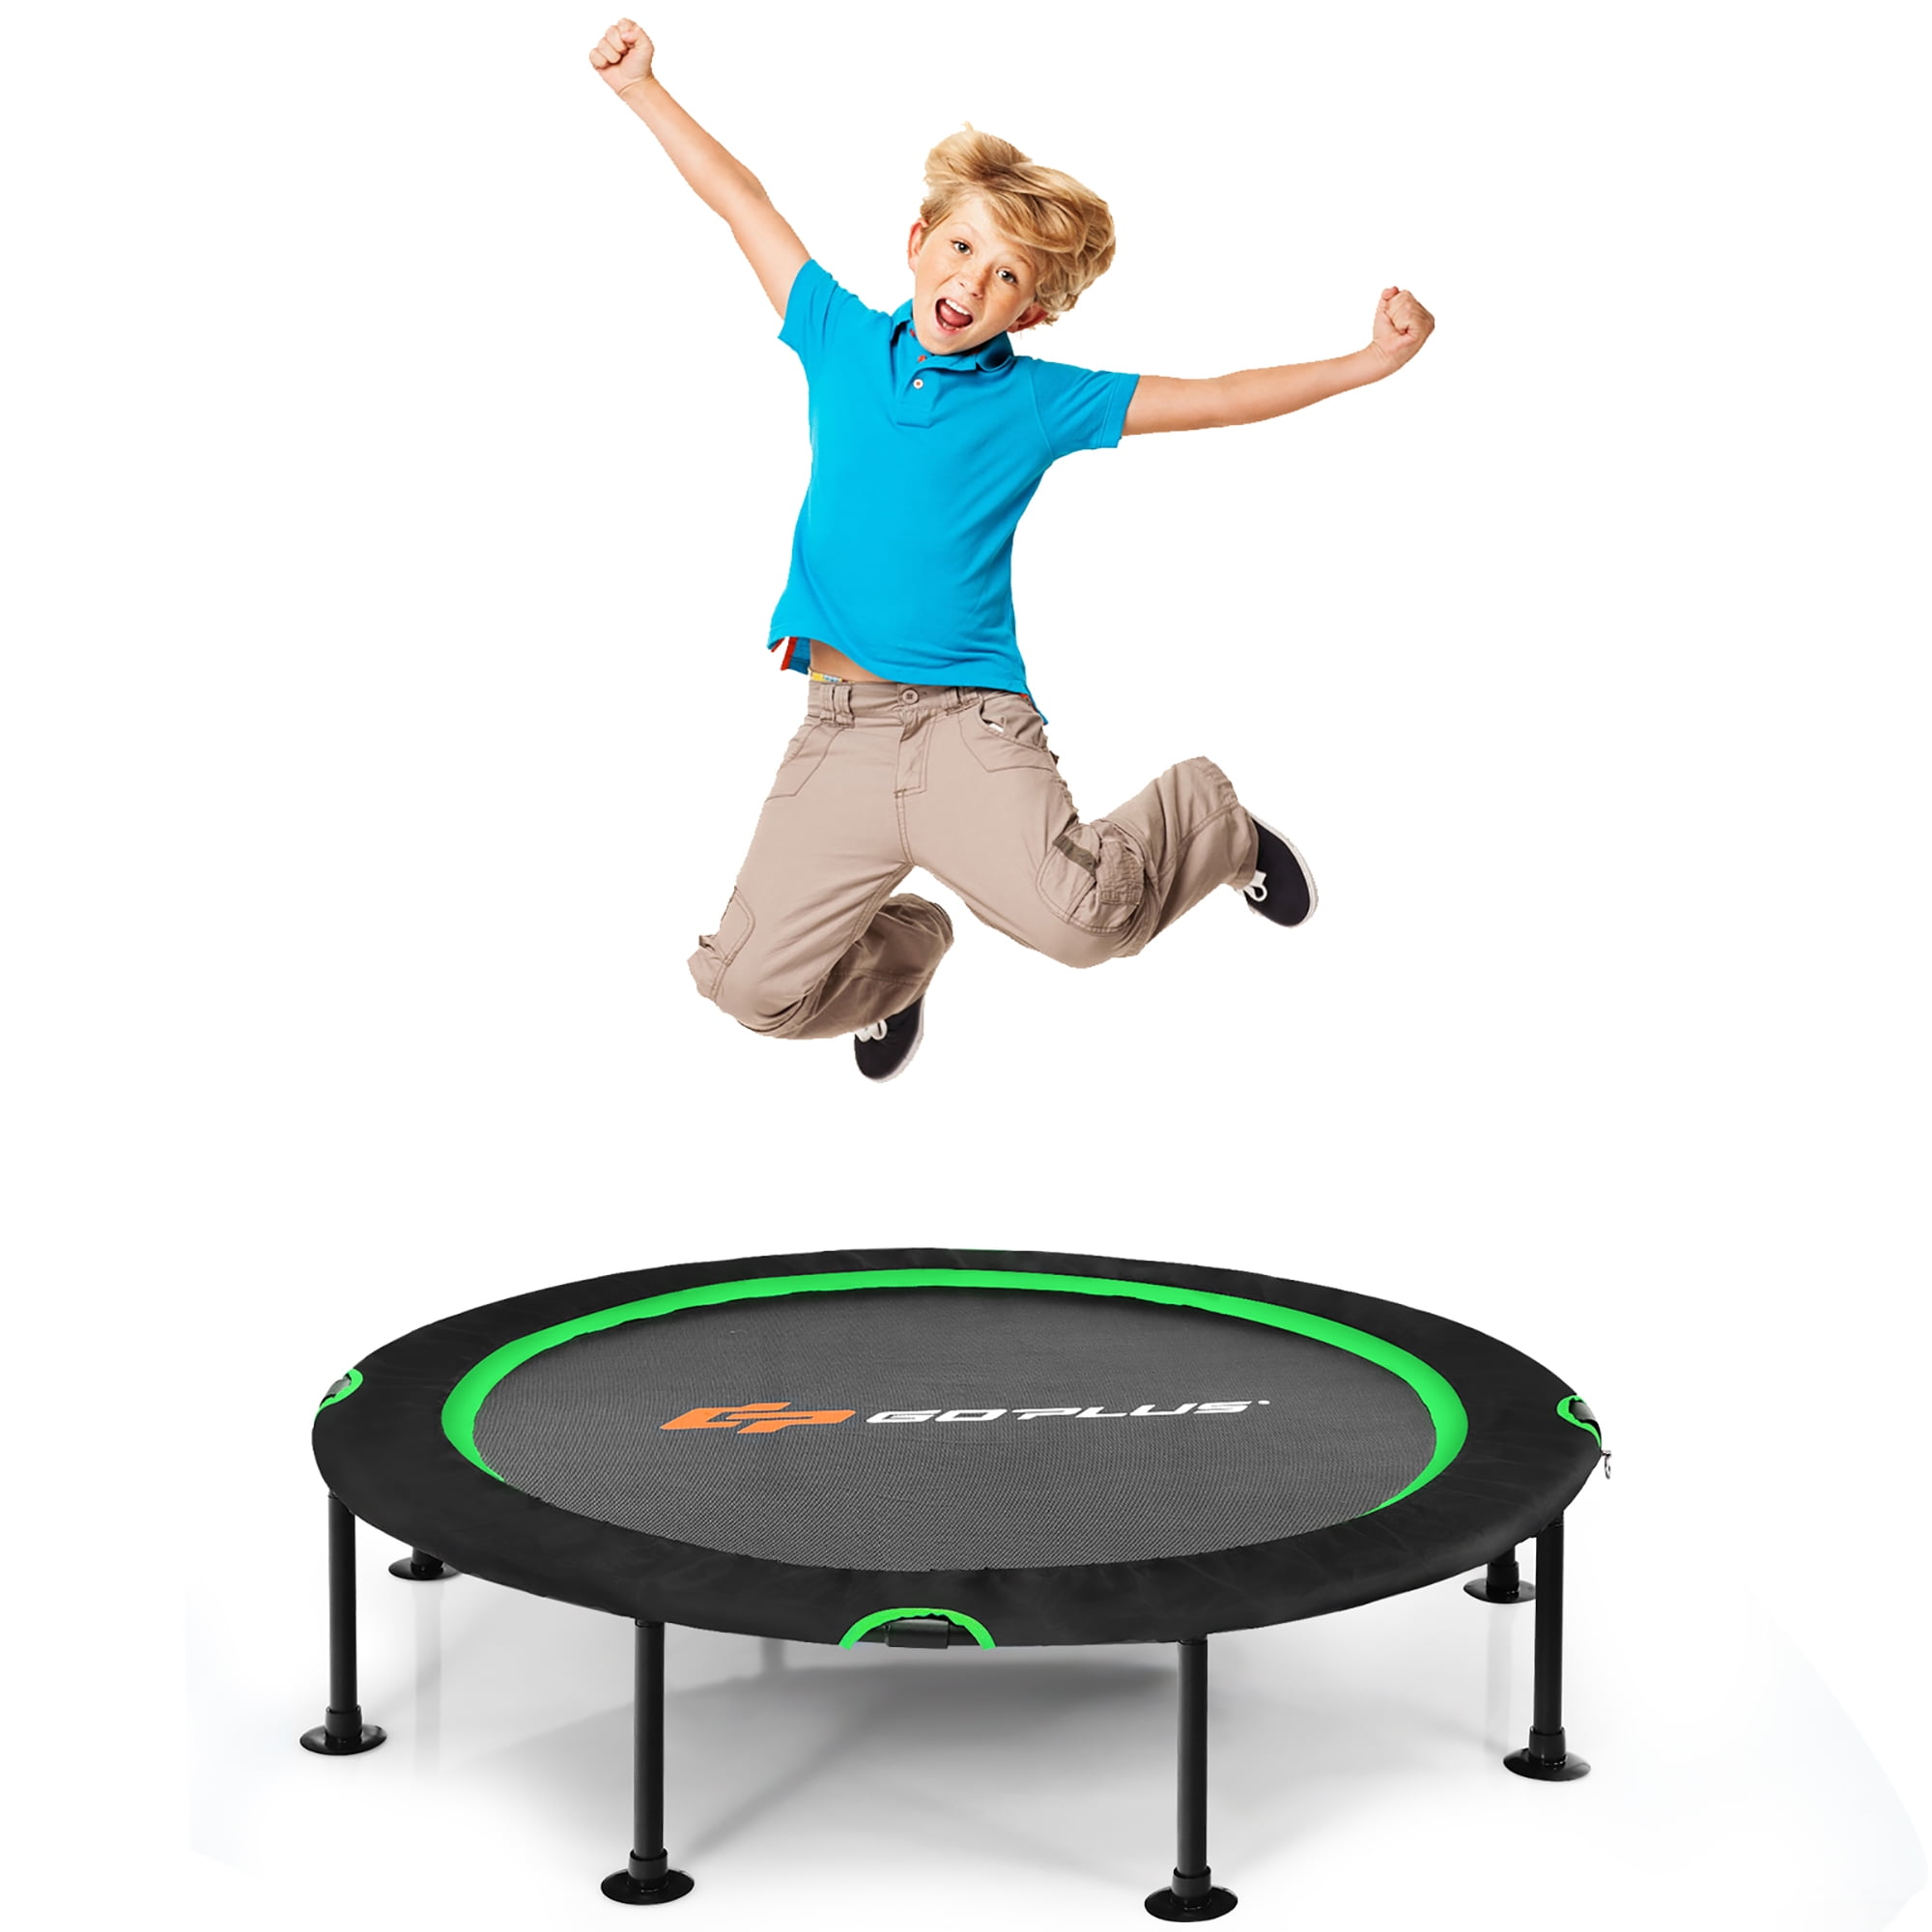 Outdoor Indoor Rebounder for Adults Kids Jumping Cardio Workout Trainning Goplus 50 Hexagonal Fitness Trampoline Silent Exercise Mini Trampoline with Safety Pads & Durable Bungee Cords 